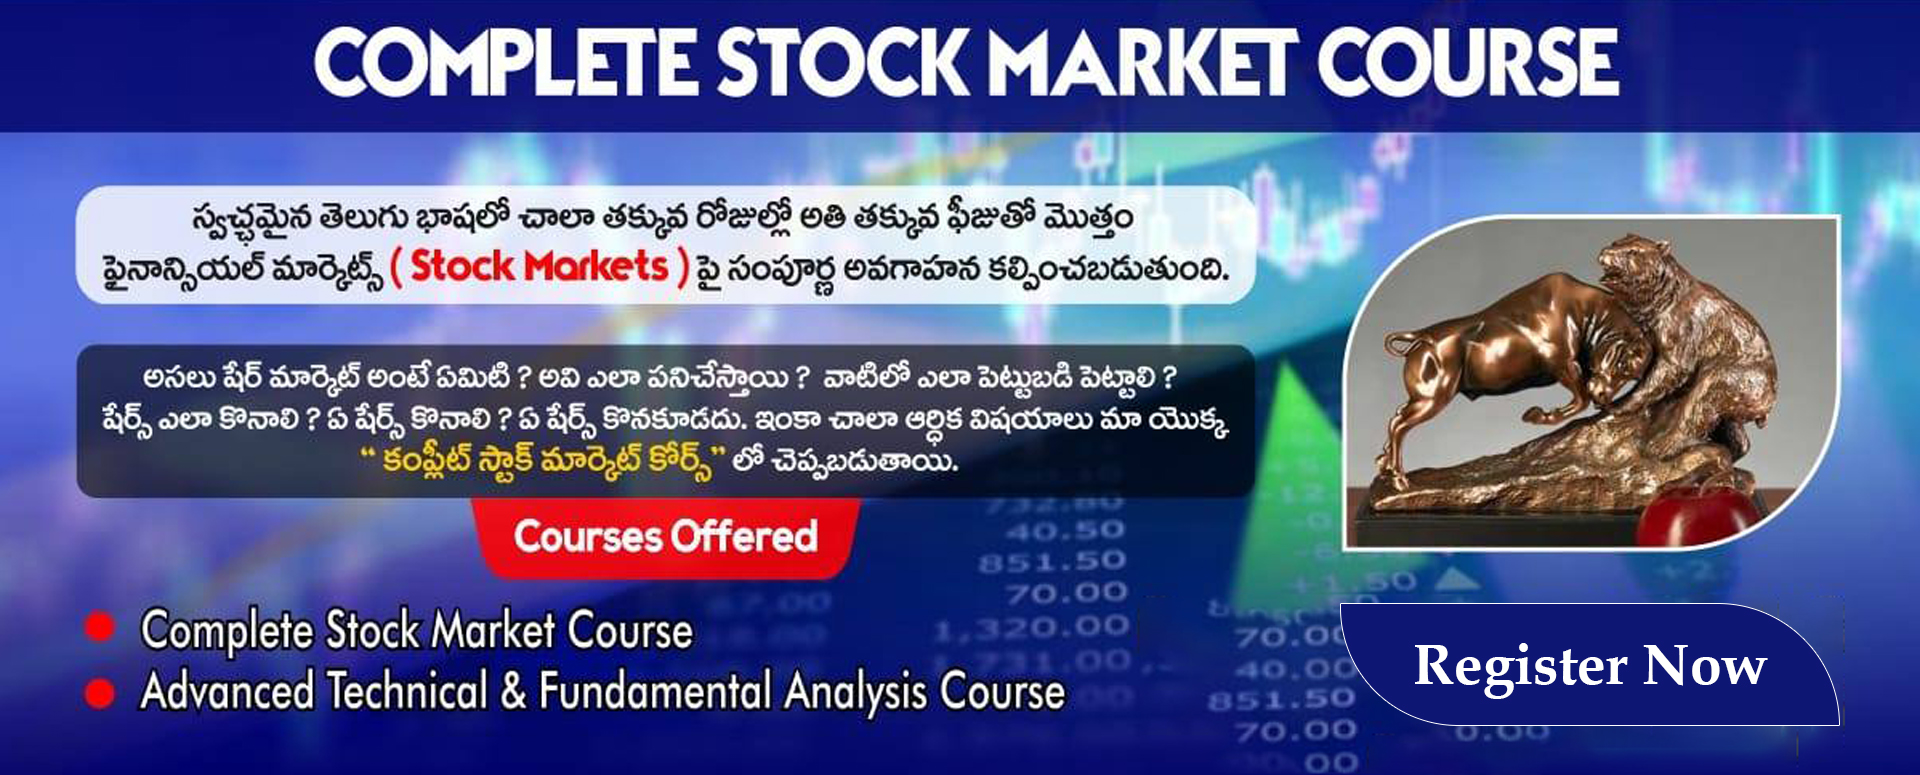 COMPLETE STOCK MARKET COURSE